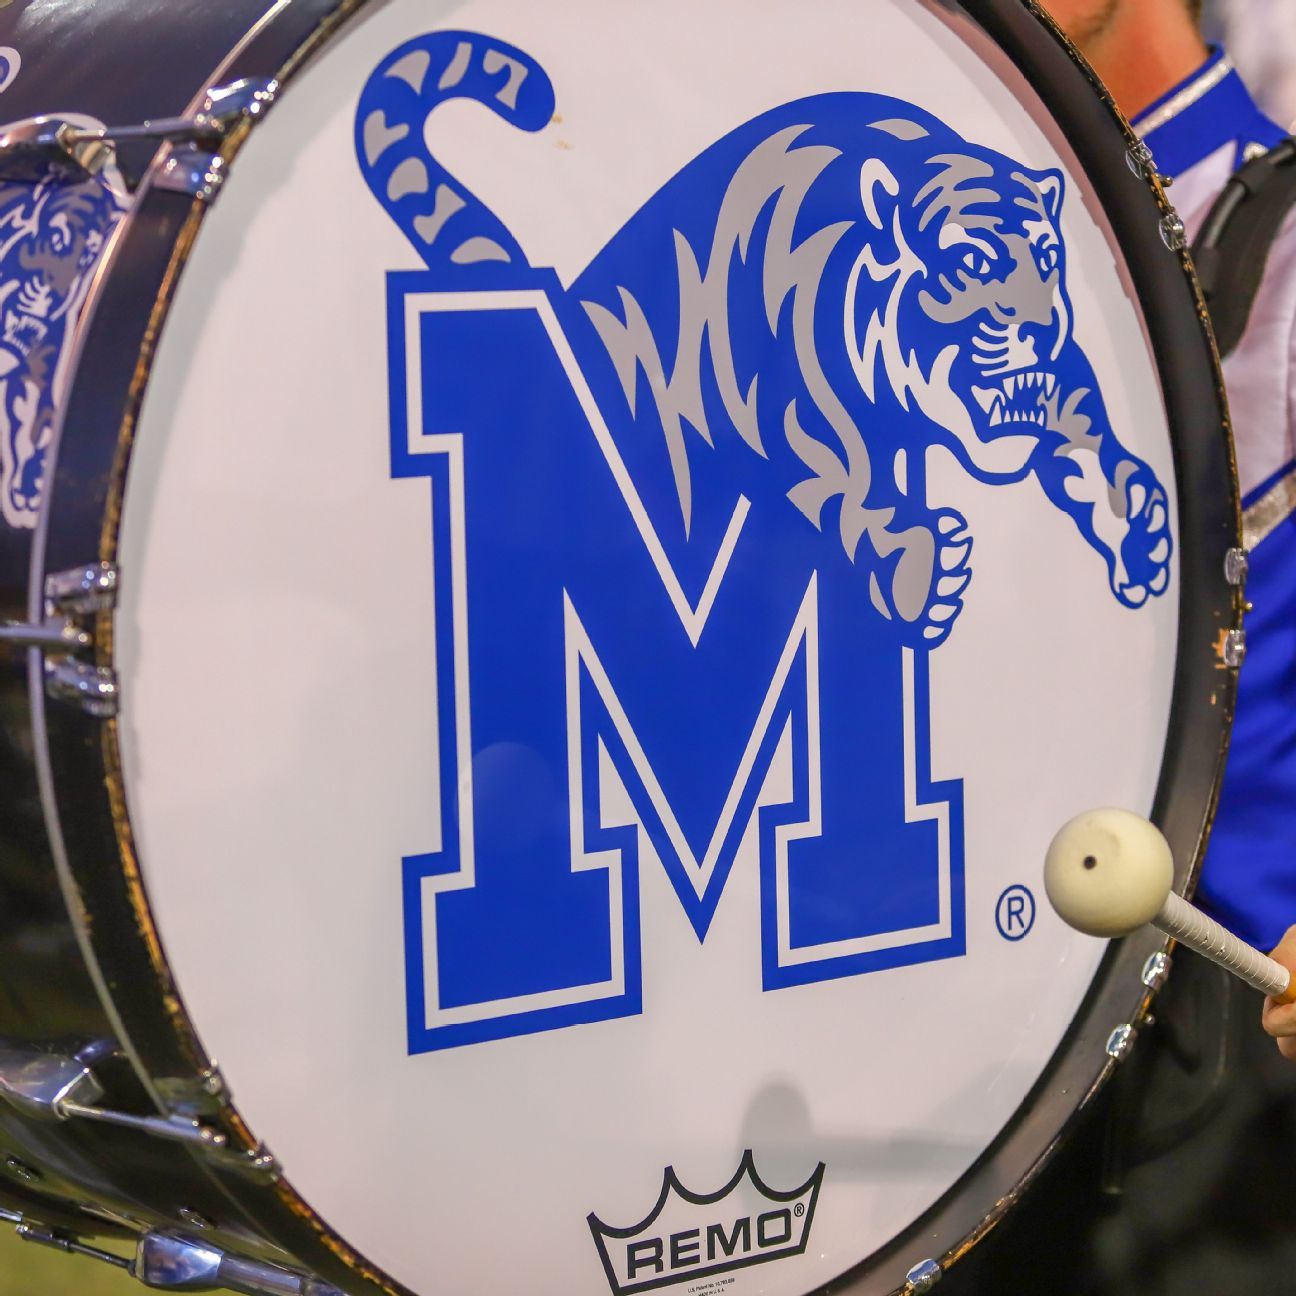 FedEx Partners with the University of Memphis in Landmark NIL Sponsorship Deal: Boosting Name, Image, and Likeness Compensation for Student-Athletes.